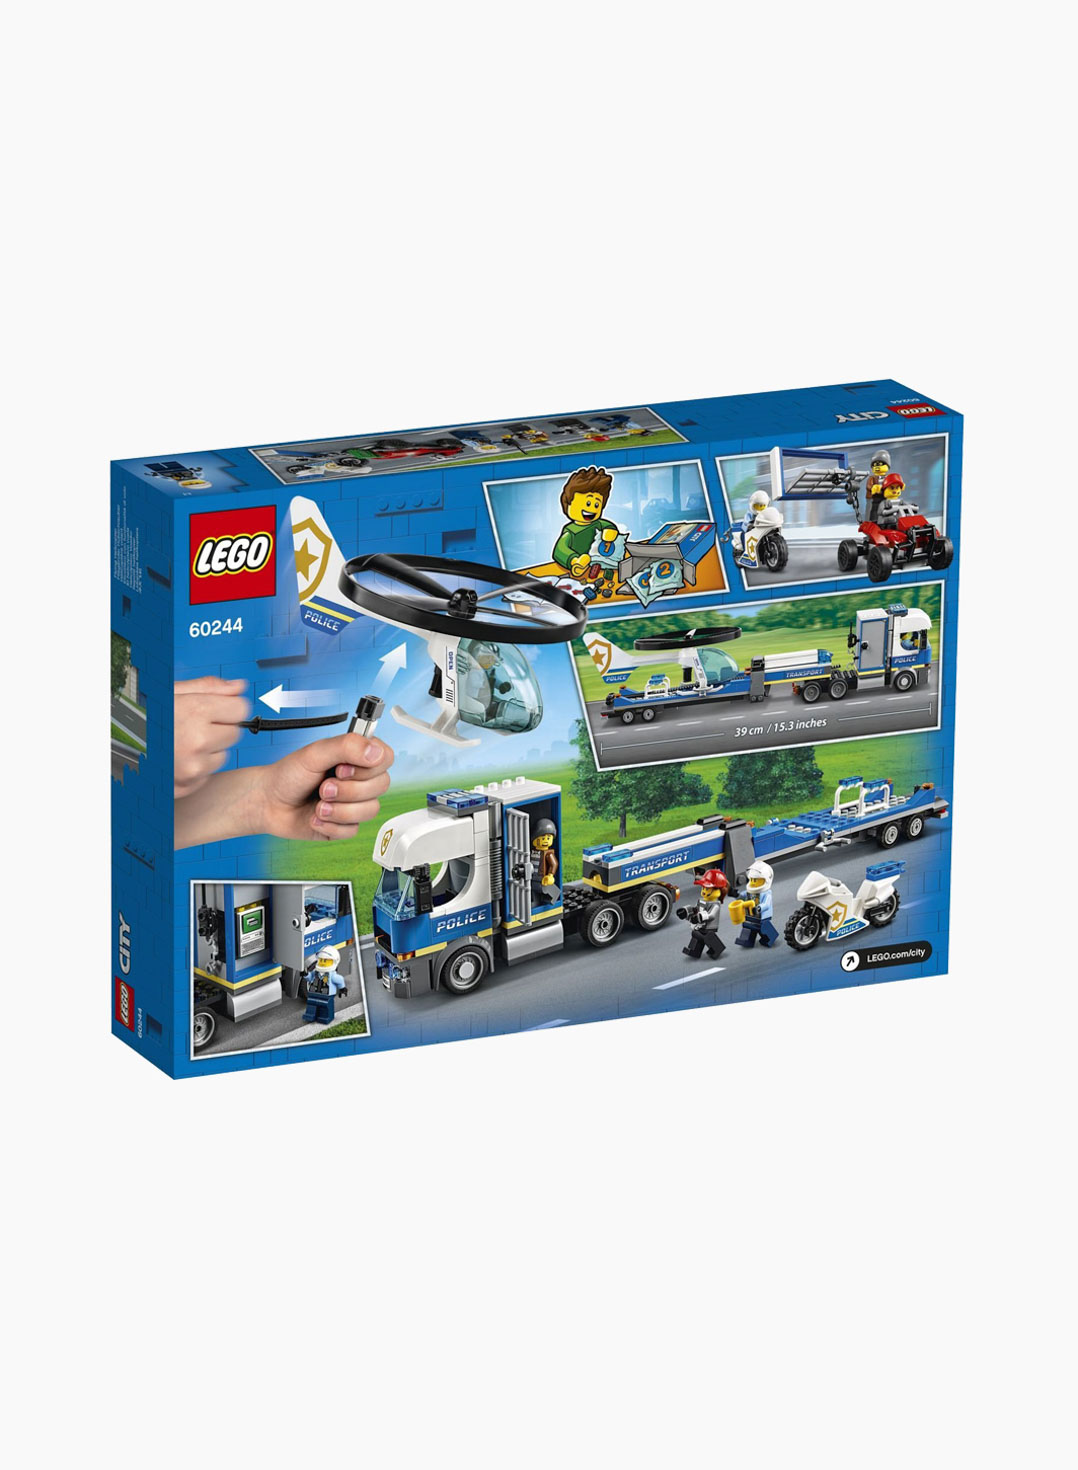 Lego City Constructor Police Helicopter Transport